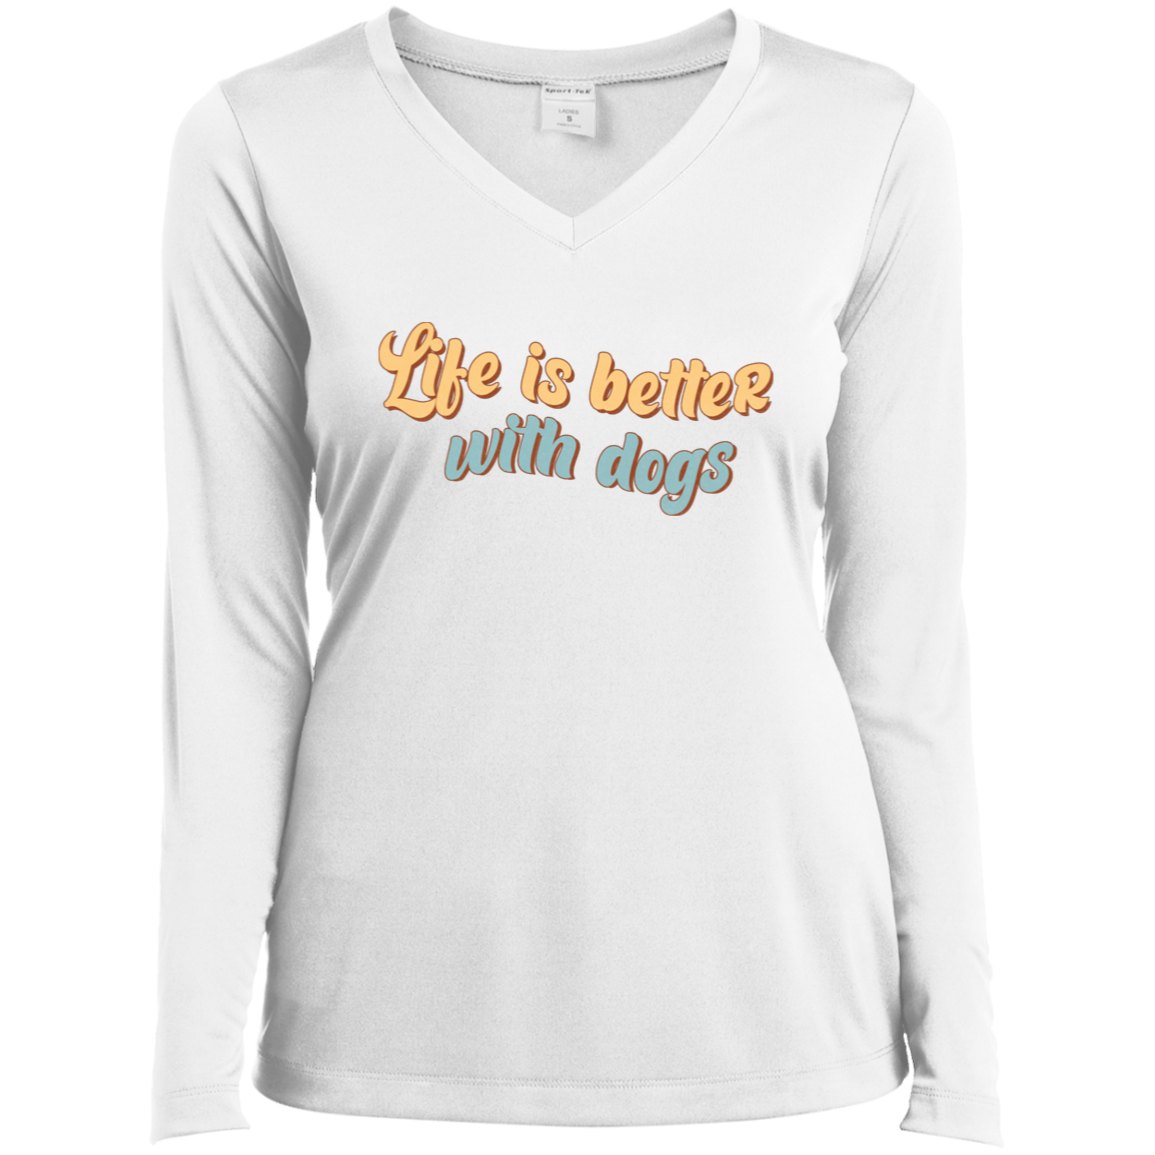 Life is Better with Dogs Ladies’ Long Sleeve Performance V-Neck Tee